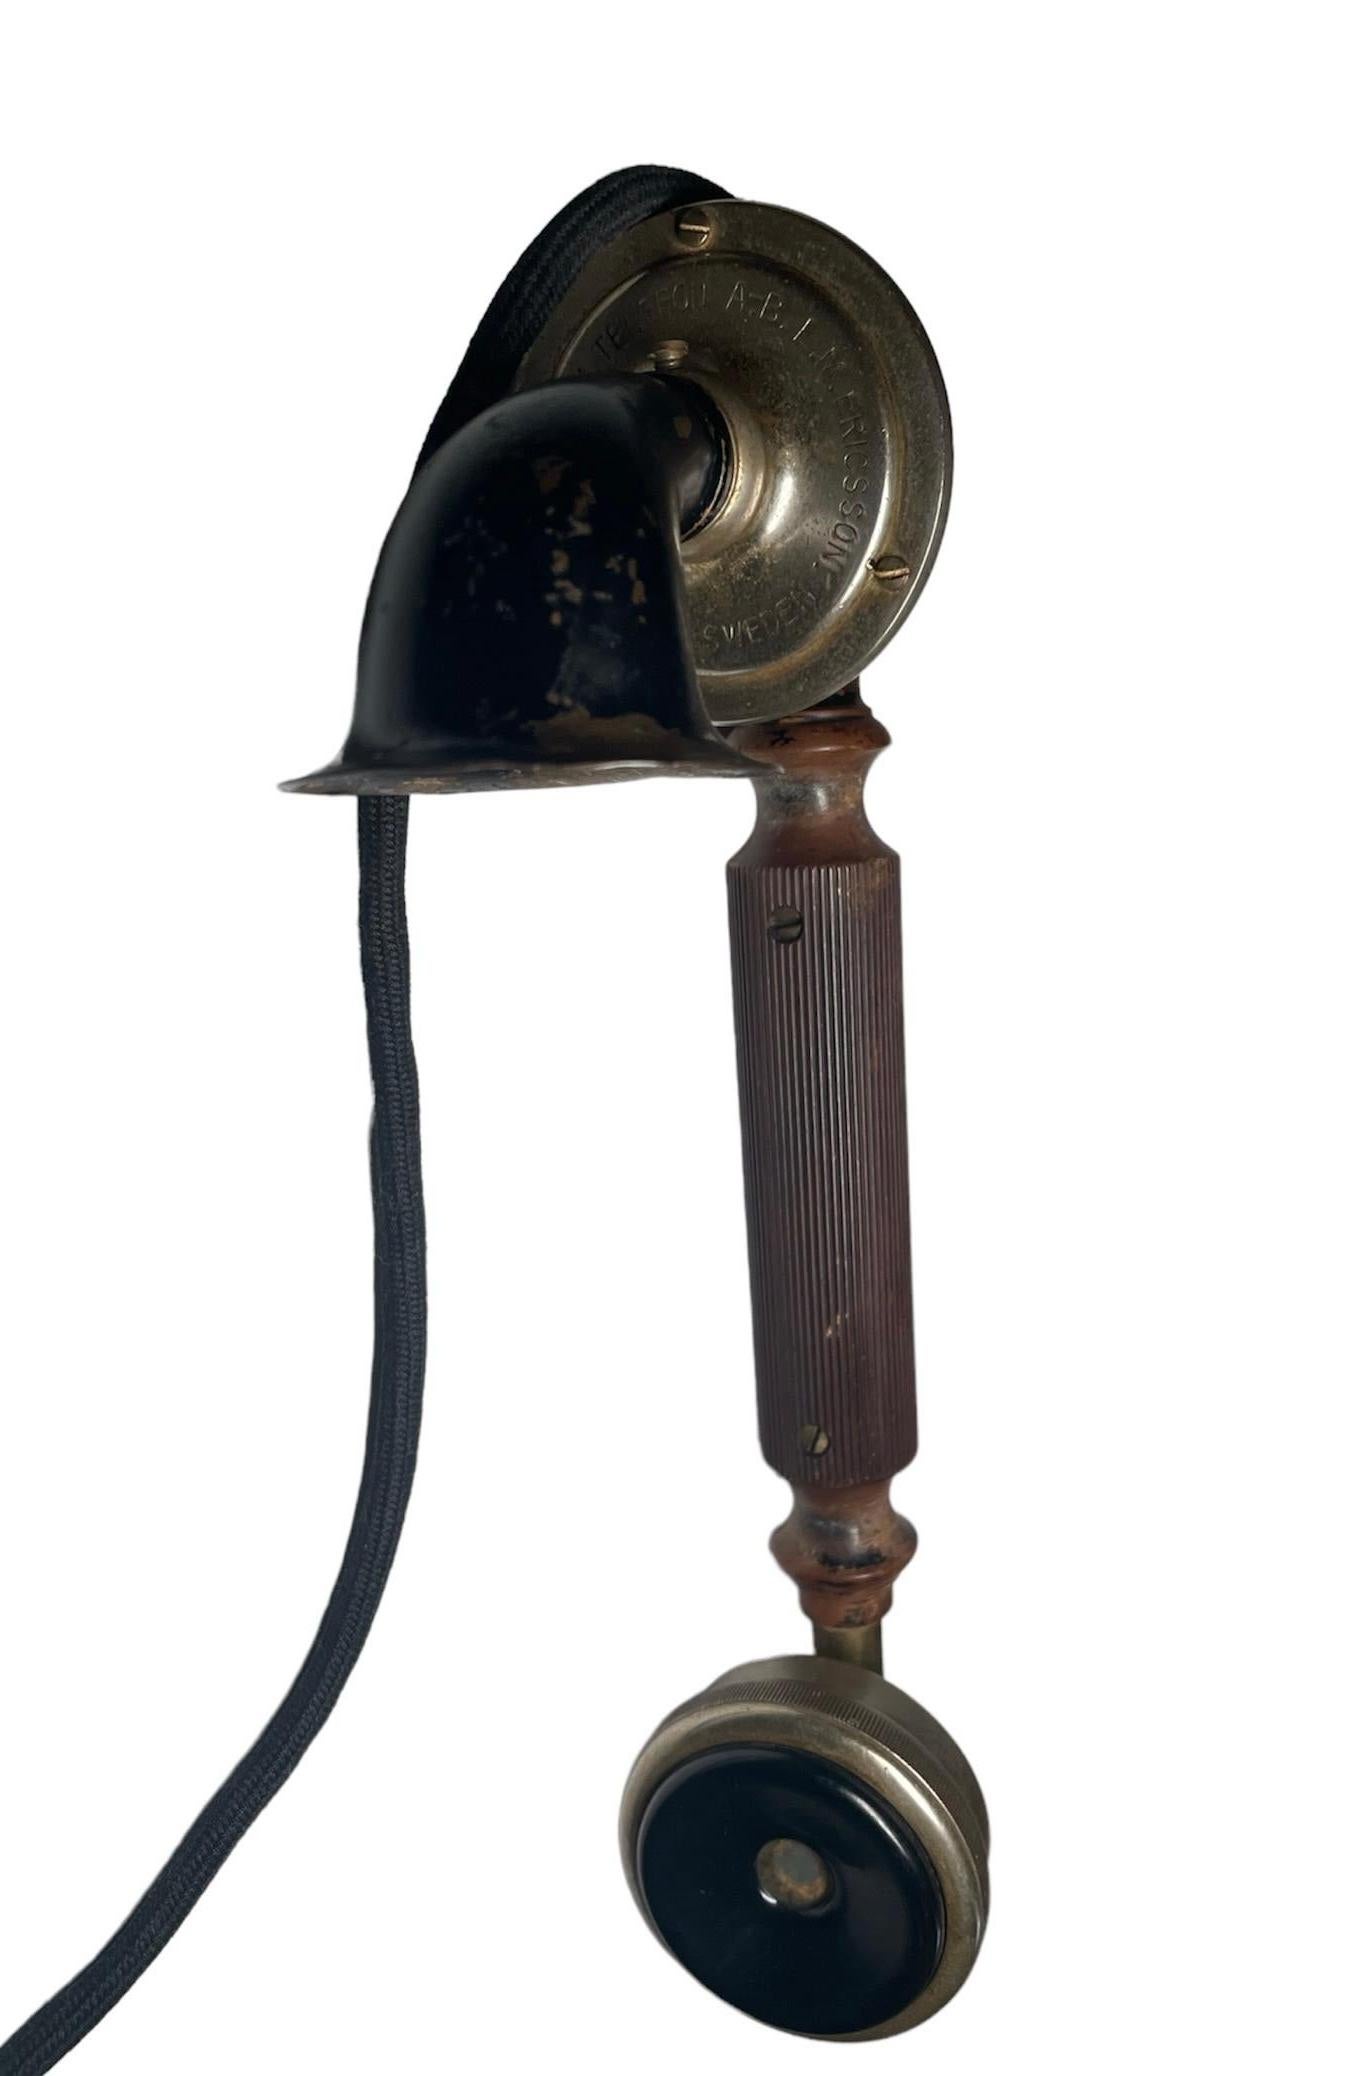 This is a A.B.L.M. Ericsson Sweden hand crank table/desk telephone as it is hallmarked in the handset. It is a rectangular heavy metal box painted black. The metal box is supported by four round metal bottom shaped feet. The handset is made of wood